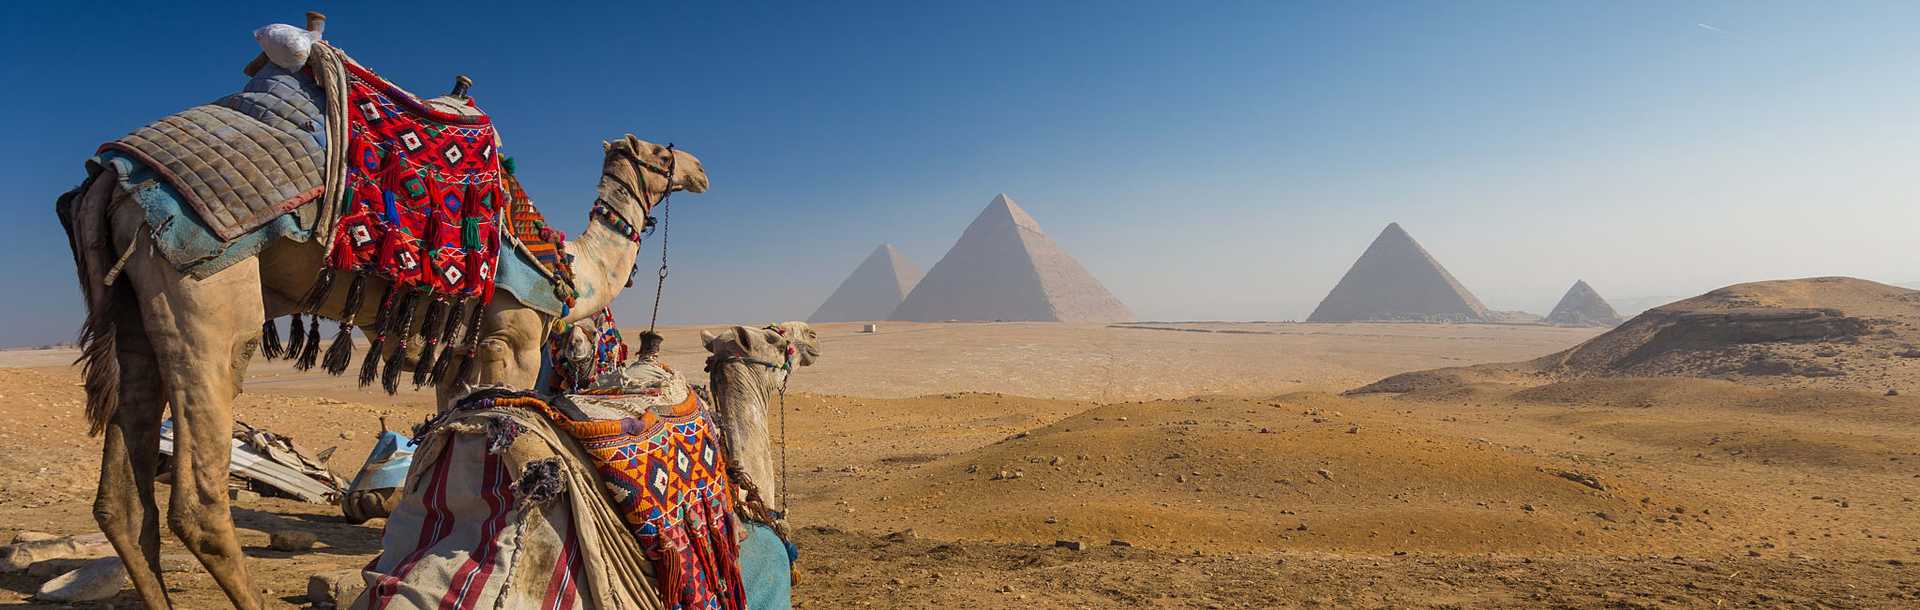 Camels with pyramids in the background on the Giza Plateau in Egypt.